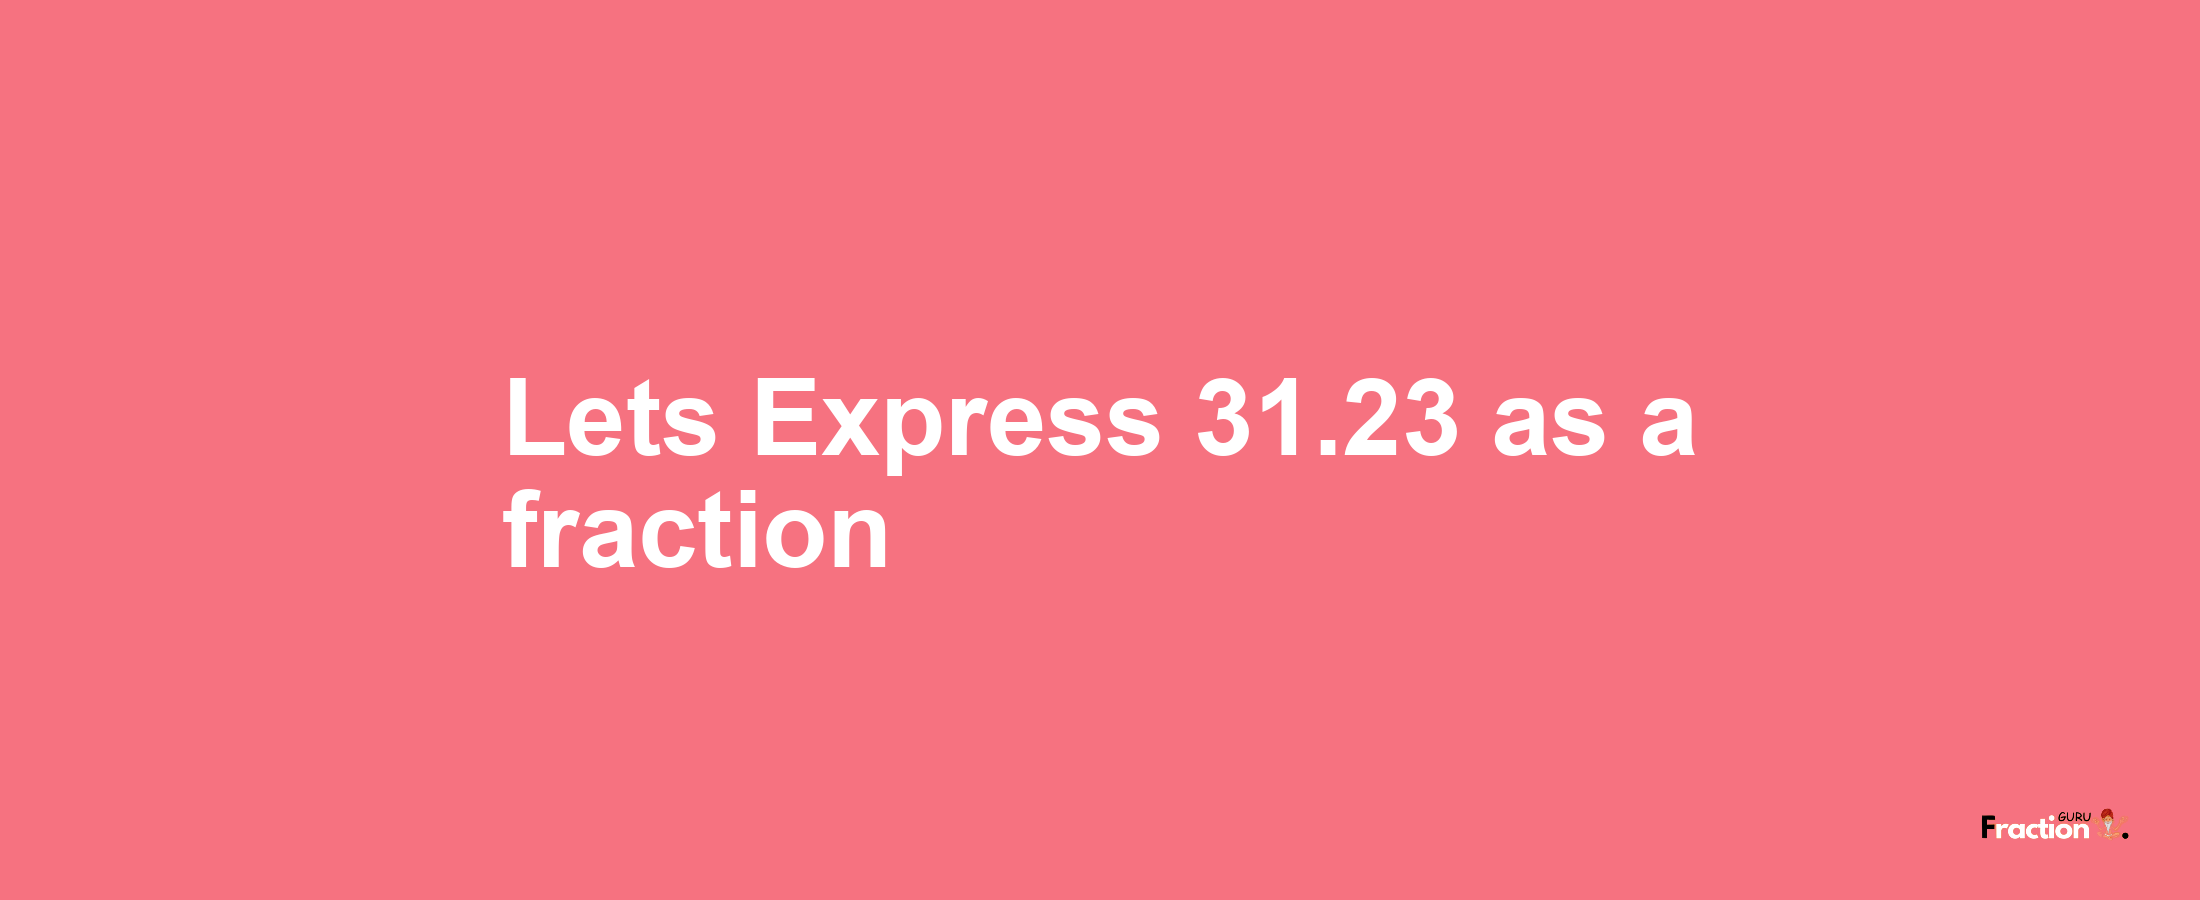 Lets Express 31.23 as afraction